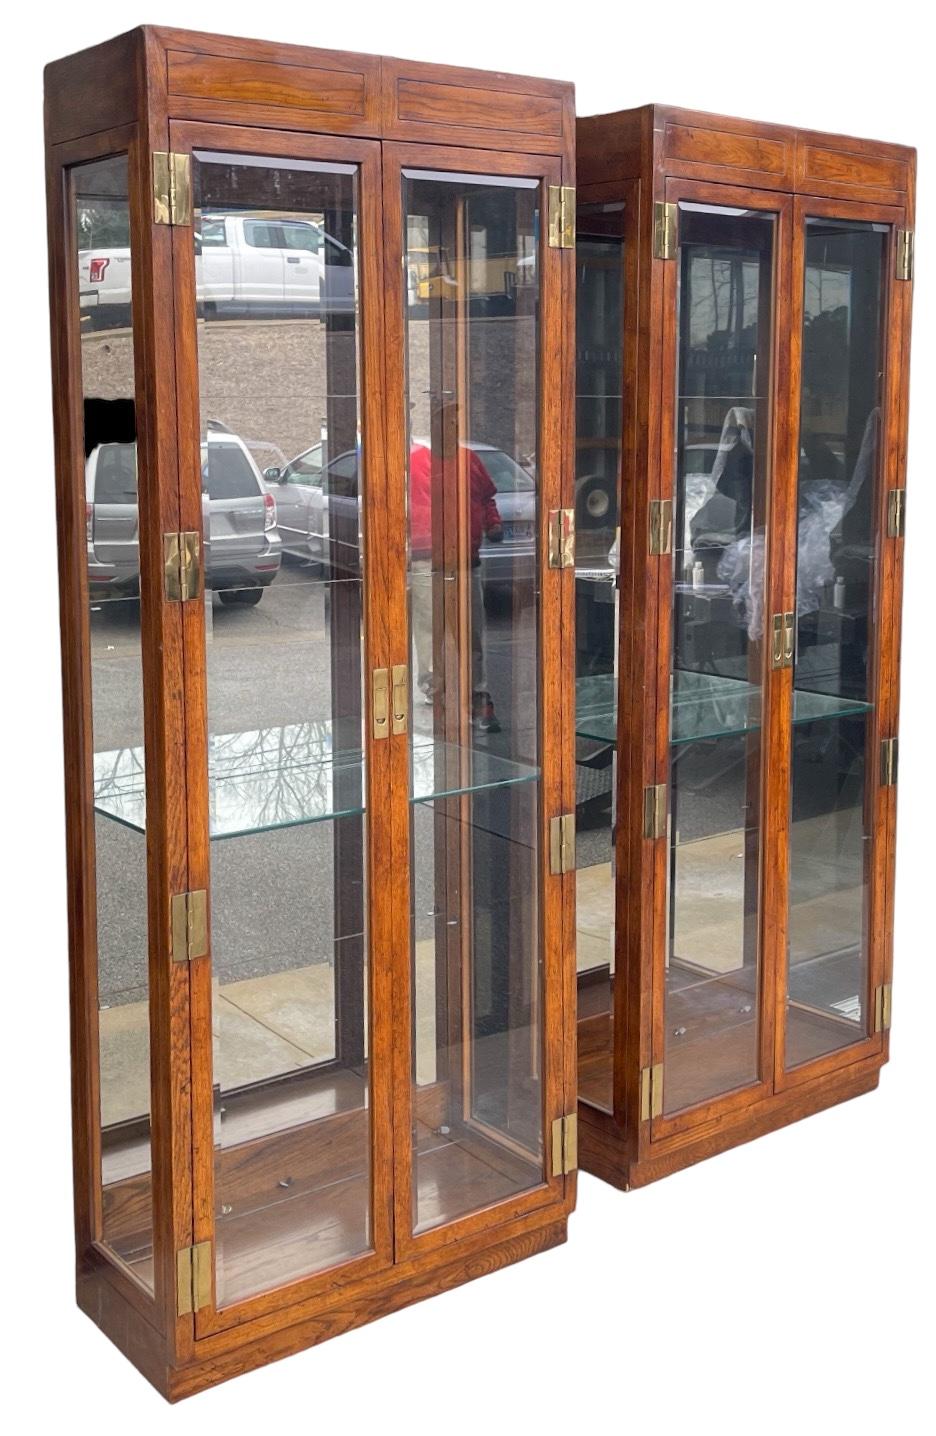 Henredon British Colonial / Campaign Style Display / Vitrine Cabinets - Pair For Sale 3